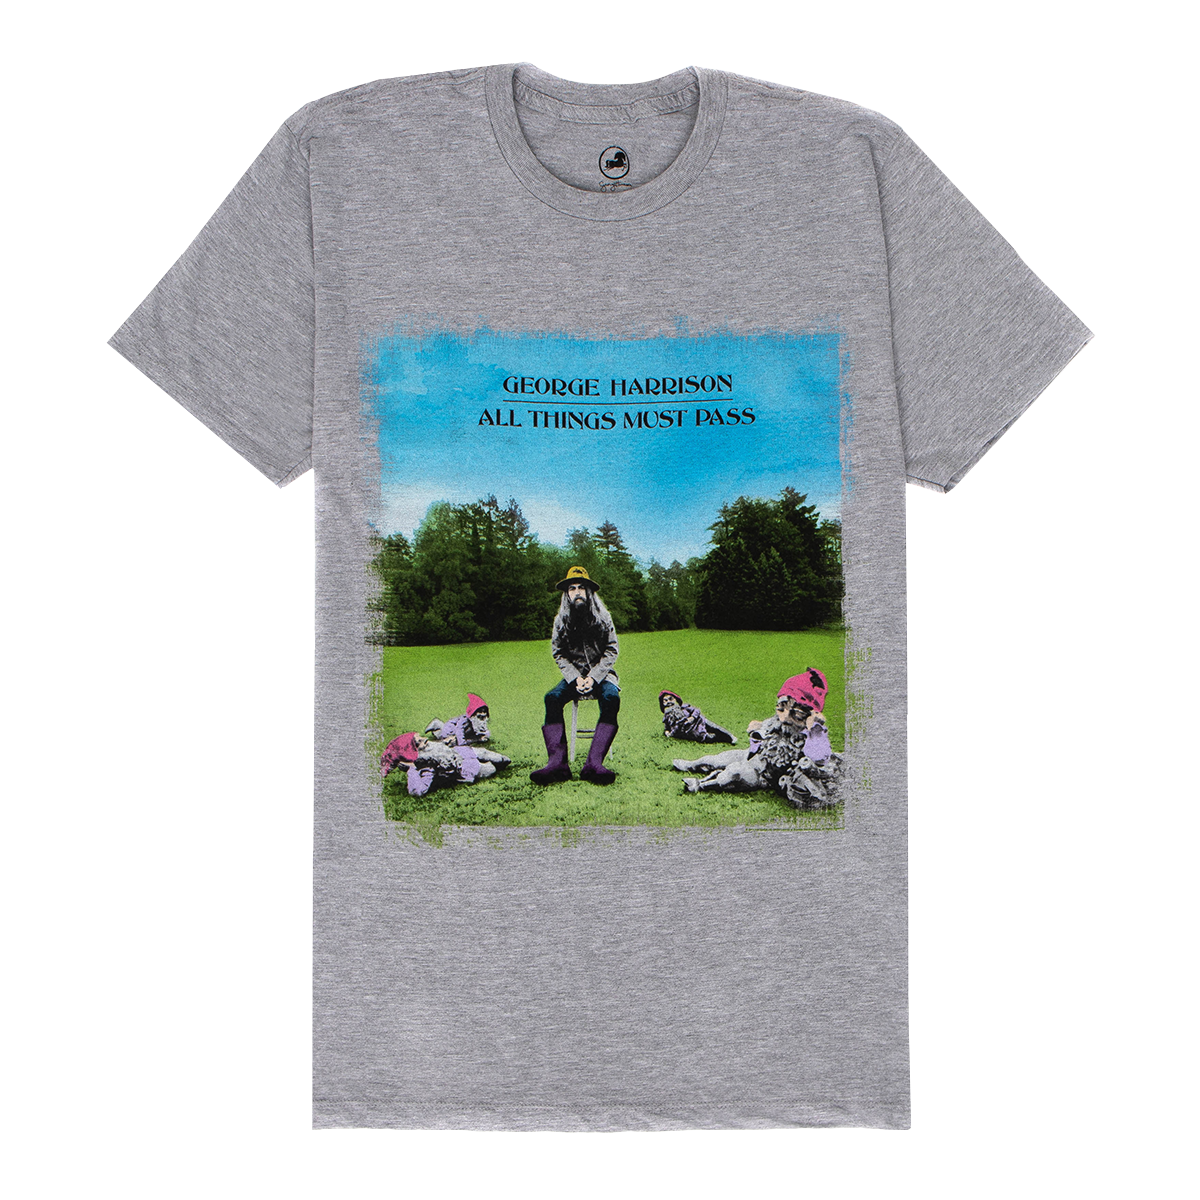 All Things Must Pass Tee - George Harrison Shop